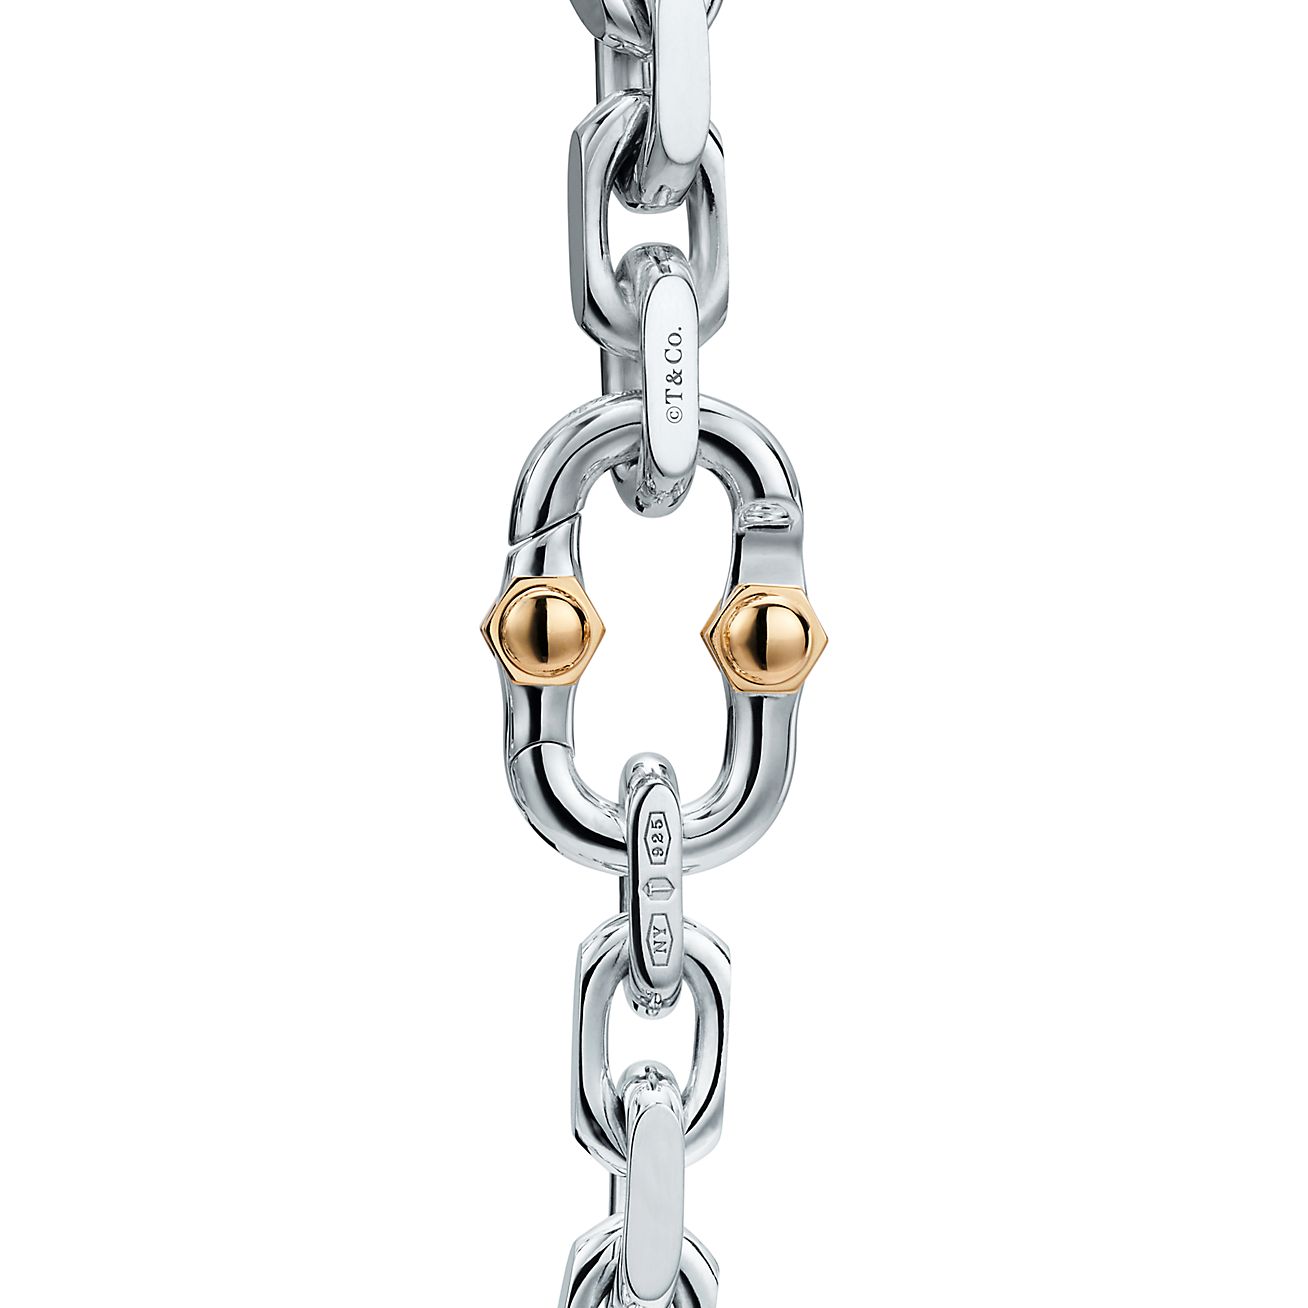 Tiffany 1837® Makers wide chain bracelet in sterling silver and 